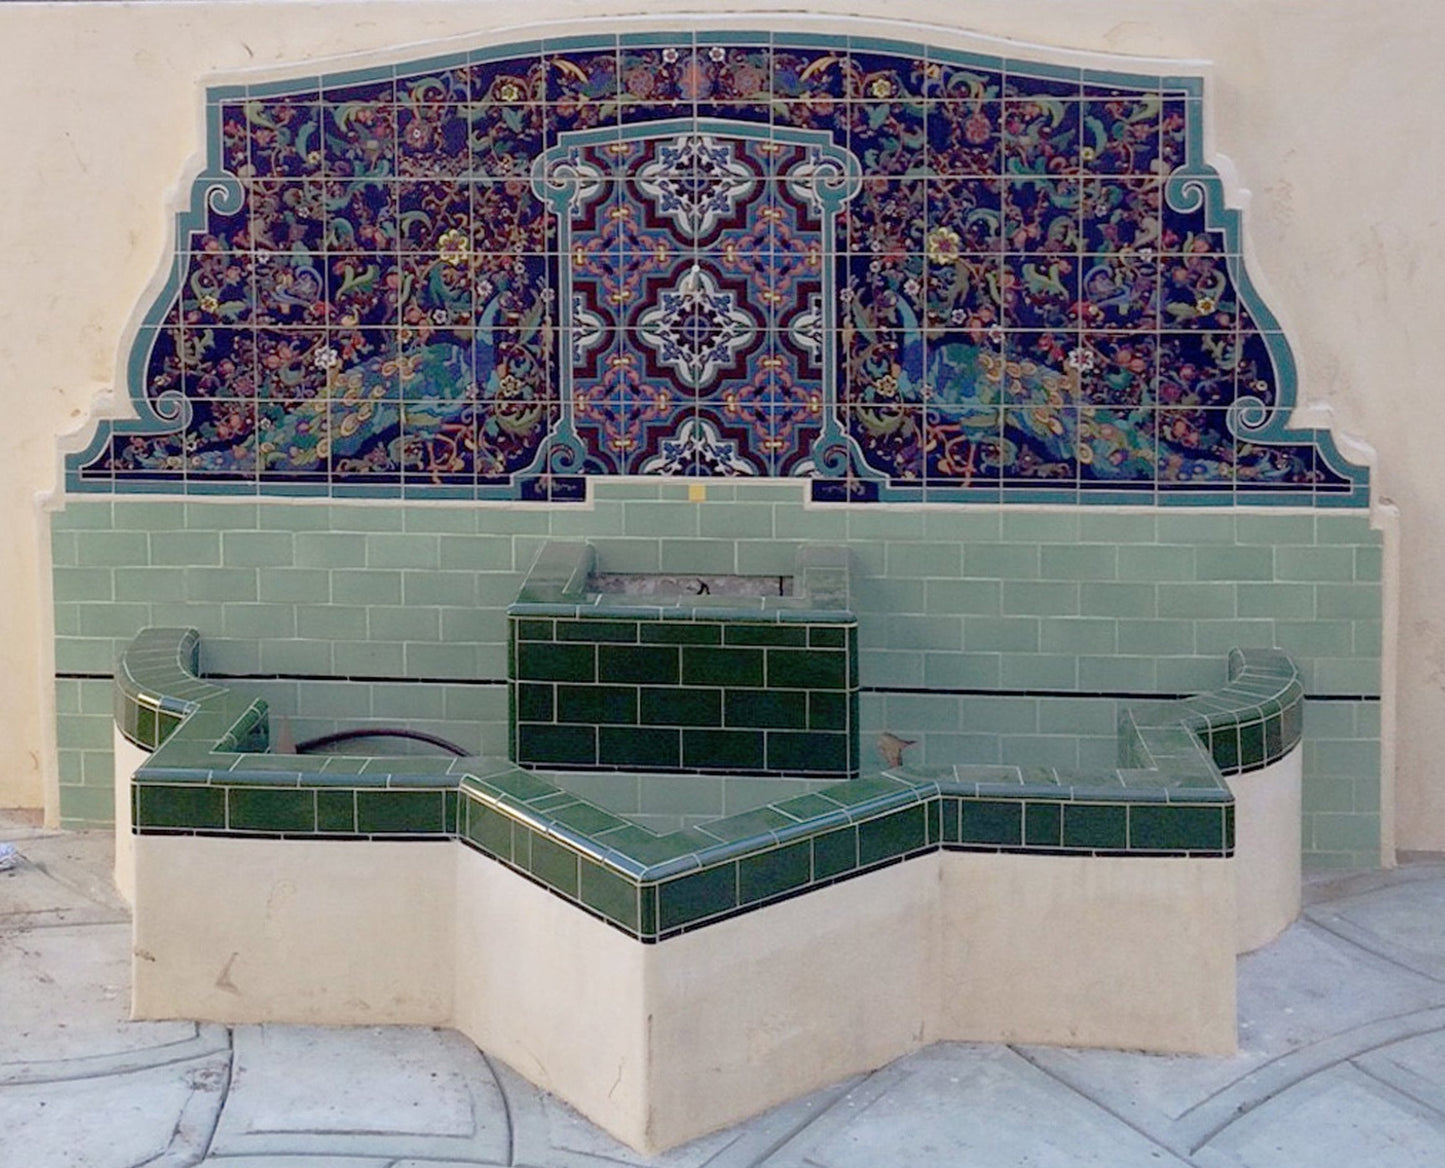 Adamsons house fountain  peacock mural in light blue, with green field tiles installed as  fountain